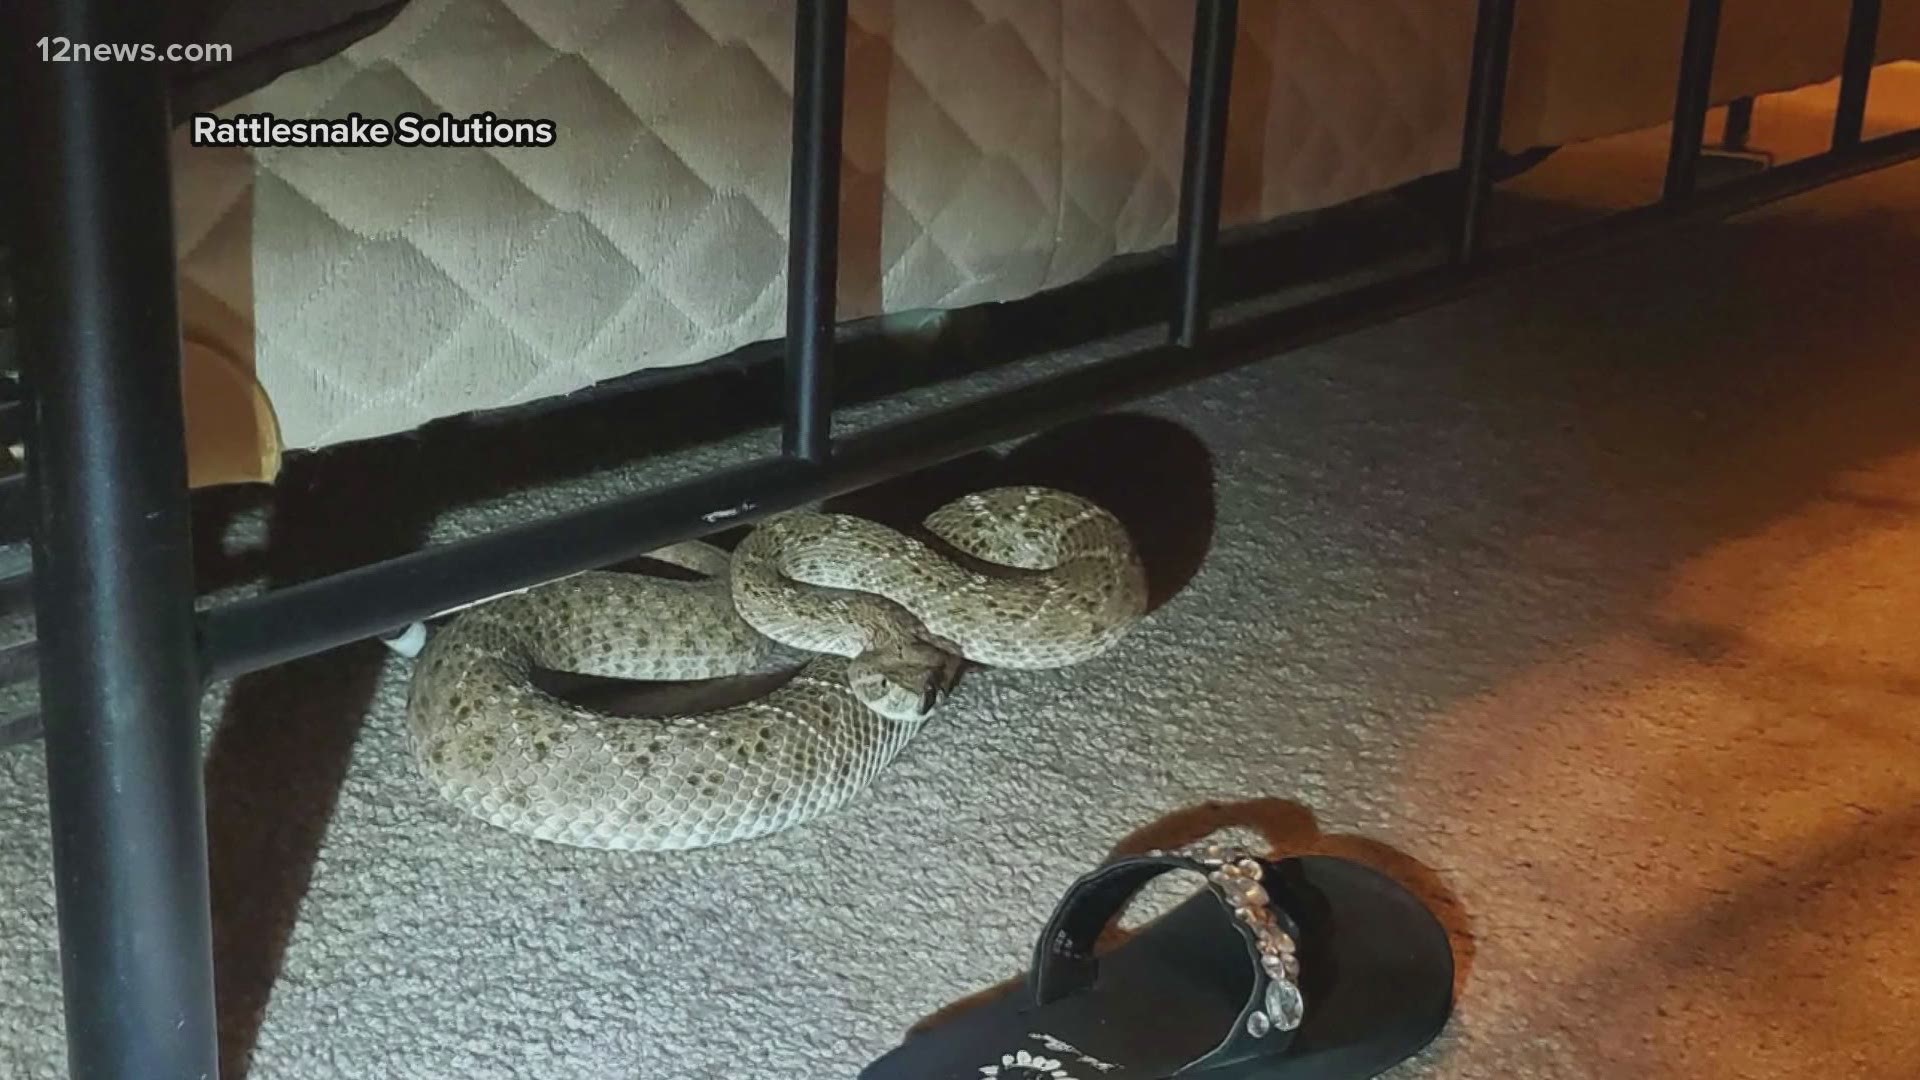 A Valley couple had the scare of a lifetime when they found a rattlesnake under their bed. A snake expert gives tips on how to stay safe during peak snake season.